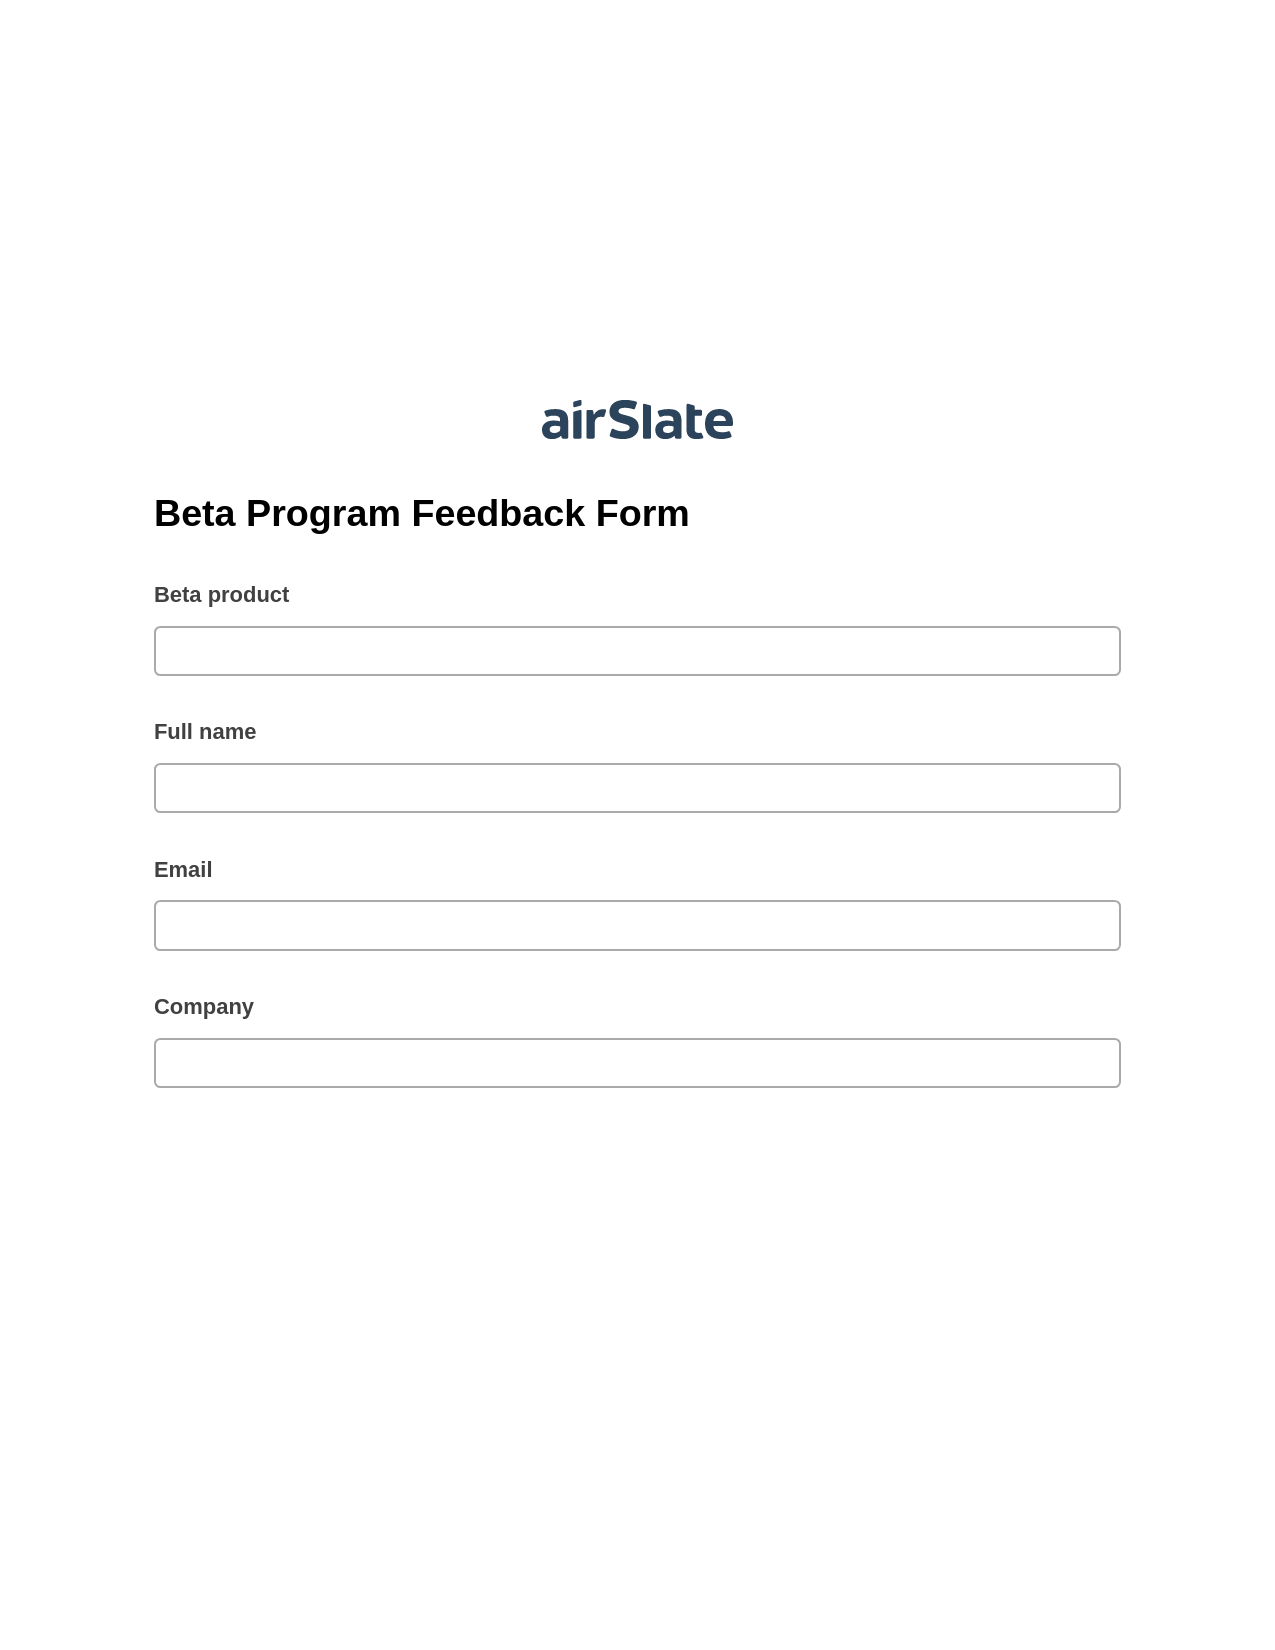 Beta Program Feedback Form Pre-fill Dropdowns from Excel Bot, Create NetSuite Records Bot, Export to NetSuite Record Bot